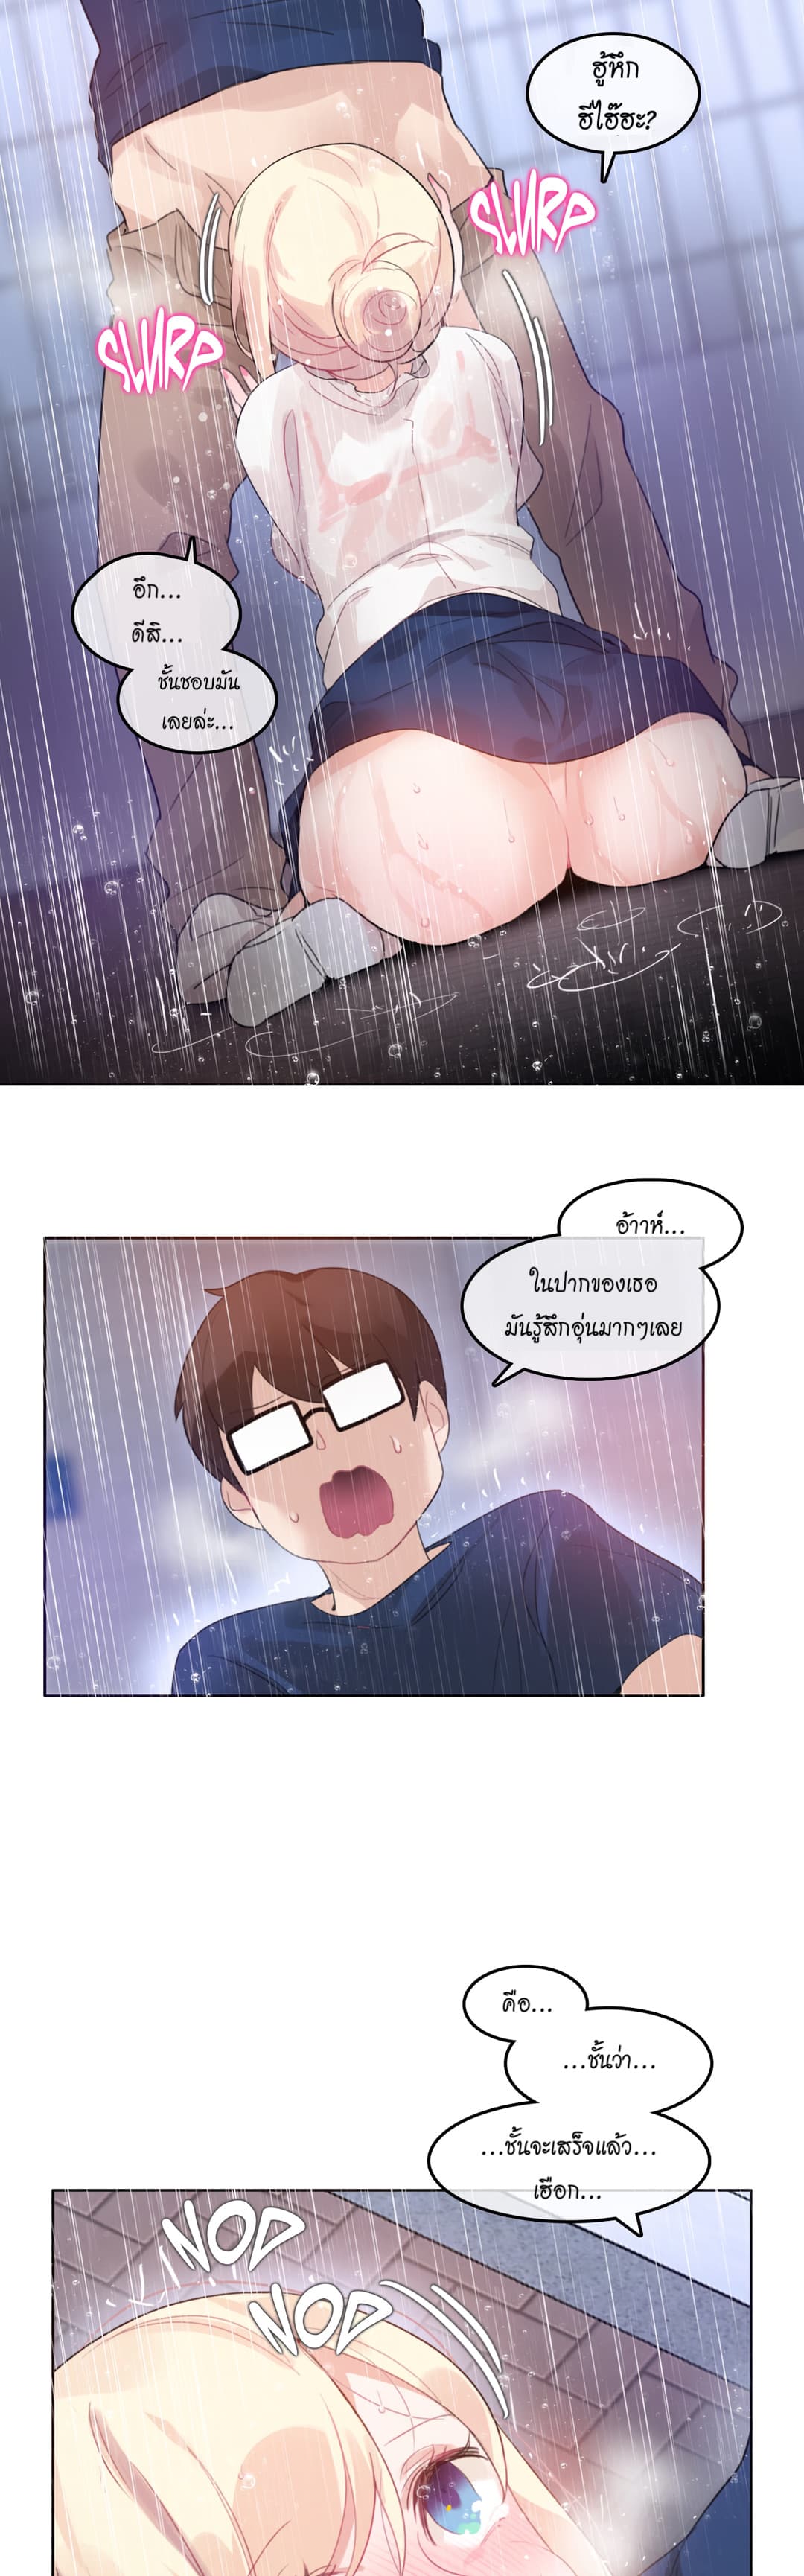 A Pervert’s Daily Life 36 (20)